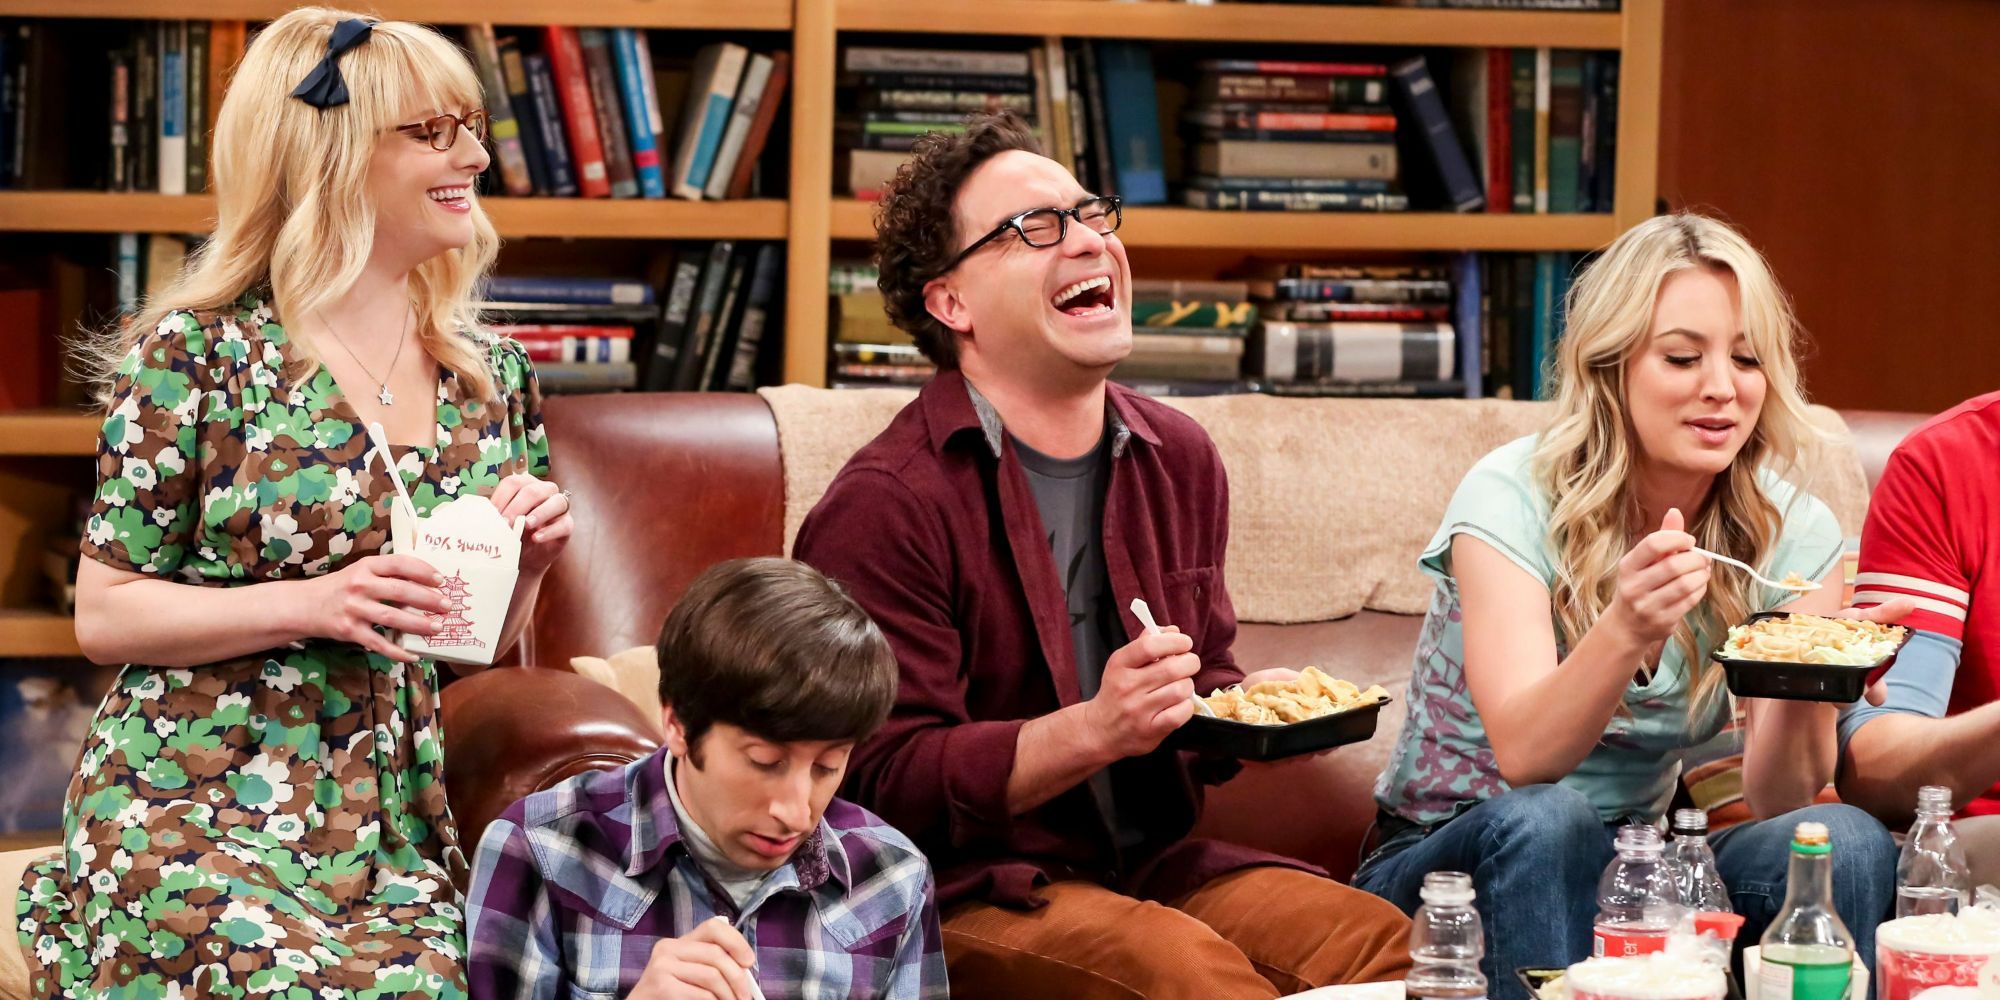 Bernadette, Howard, Leonard, Penny and the others hang out in The Big Bang Theory